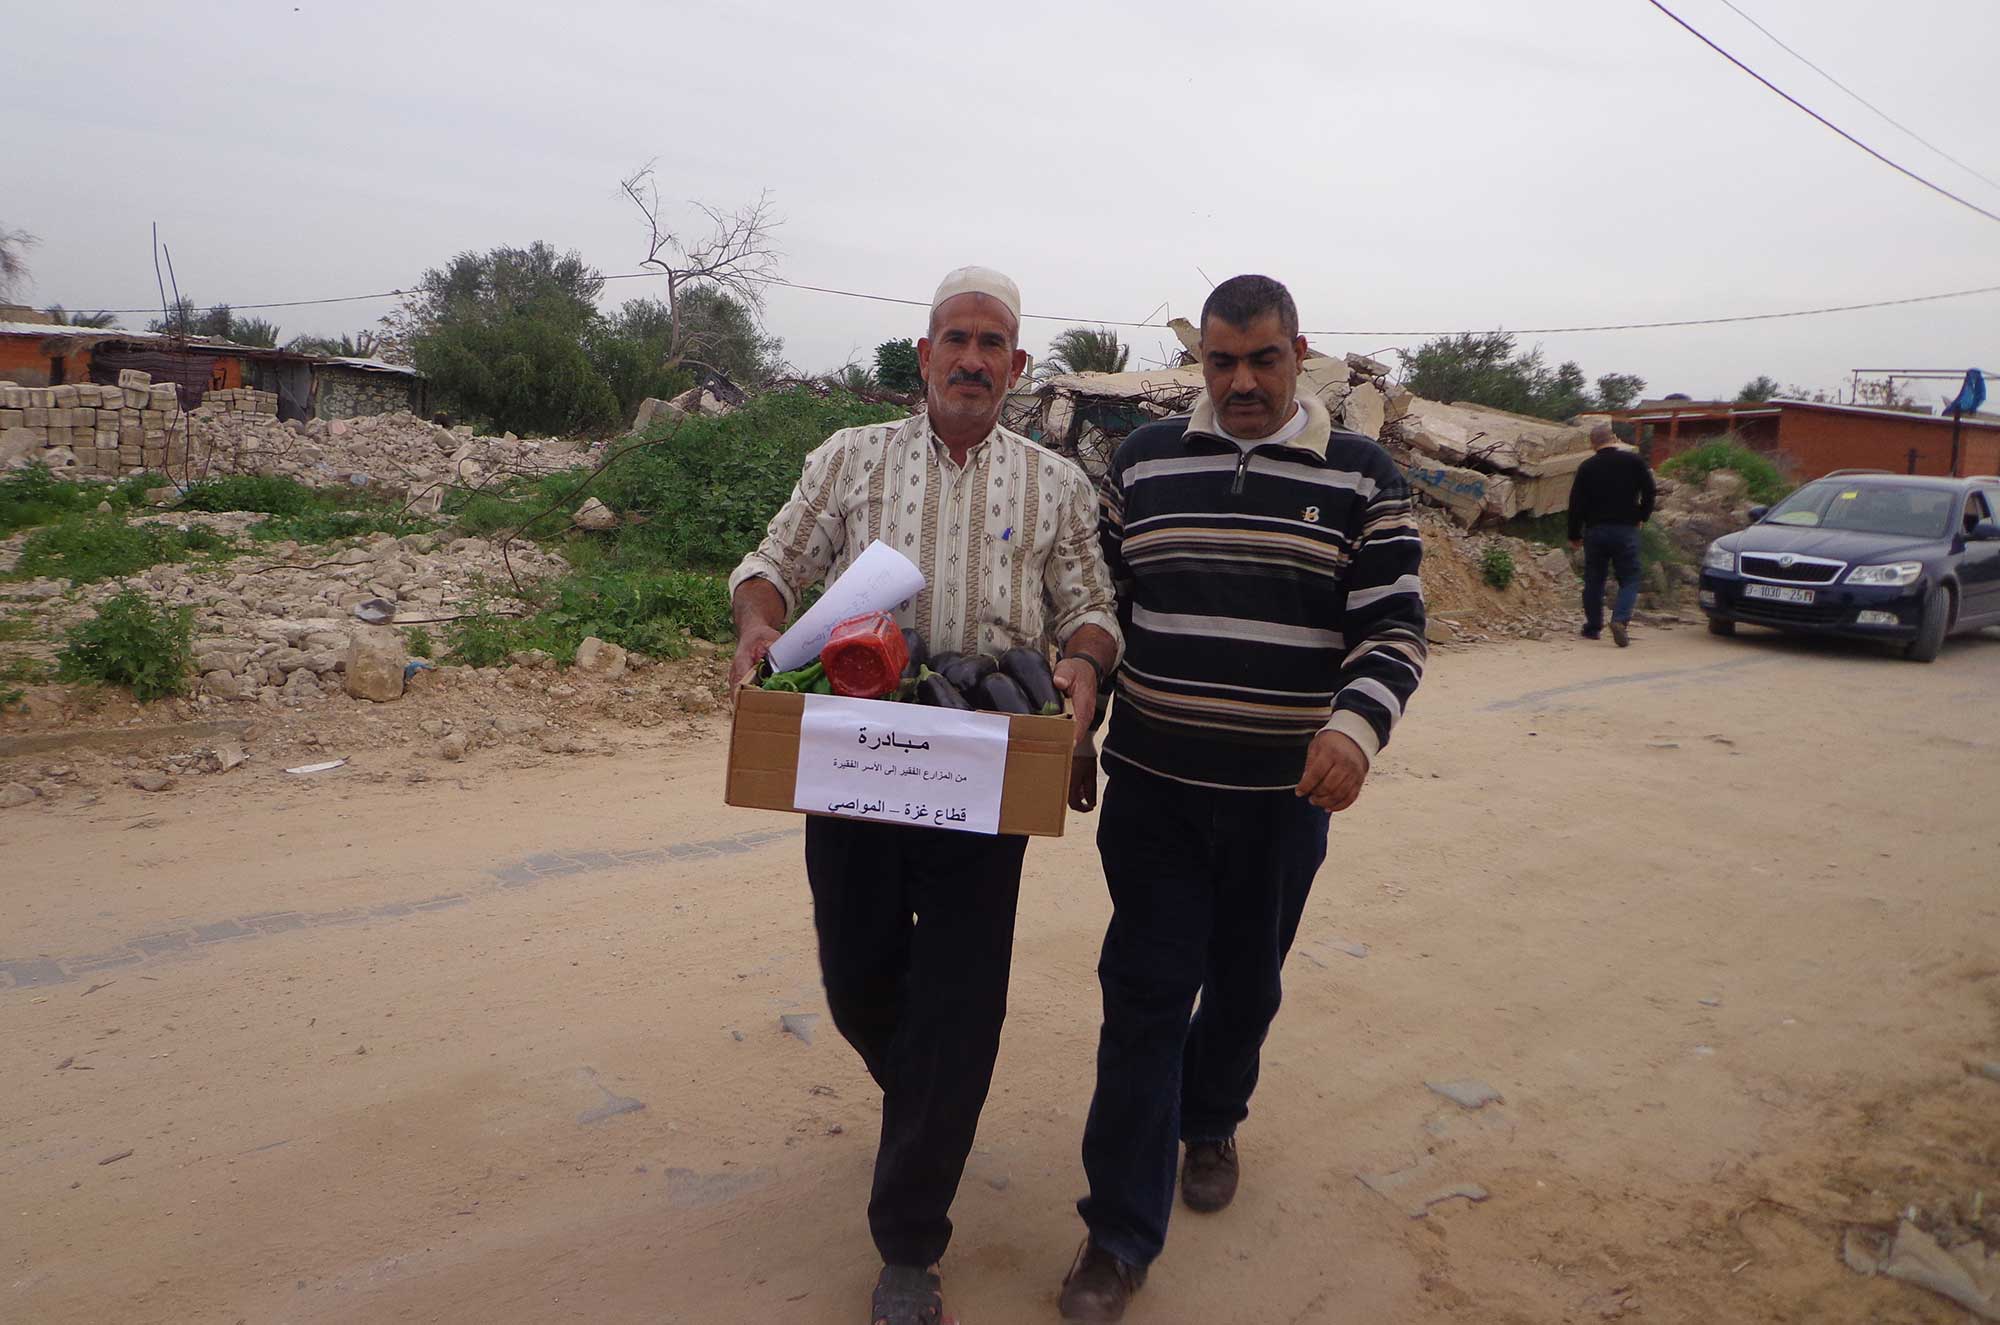 Gaza farmer Ahmed Zoerob (left) walks down the road to a encampment of prefab shelters carrying a box of fresh produce.